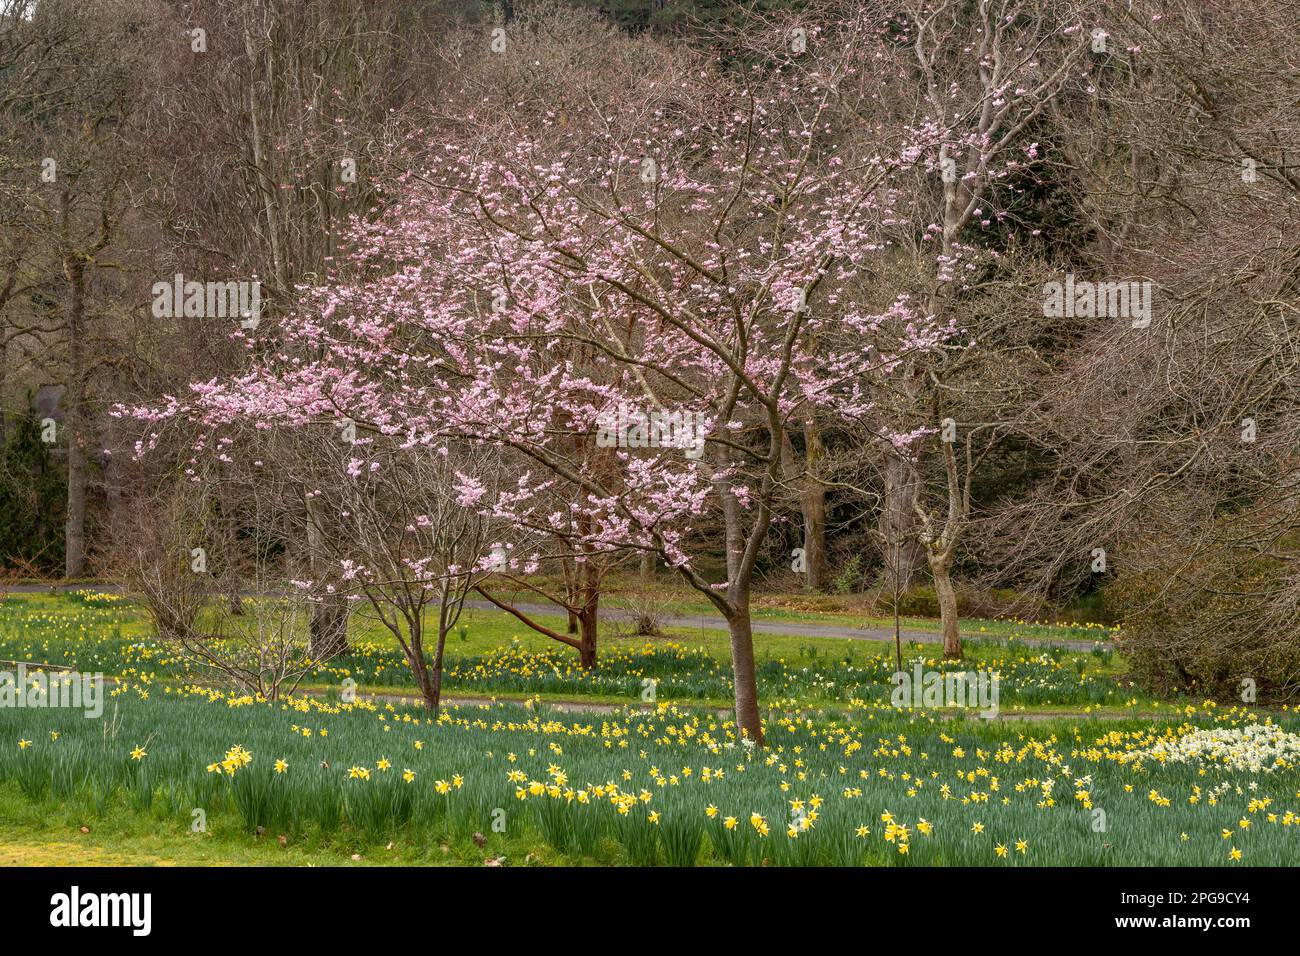 Daffodil flowers in spring with a tree in blossom Stock Photo